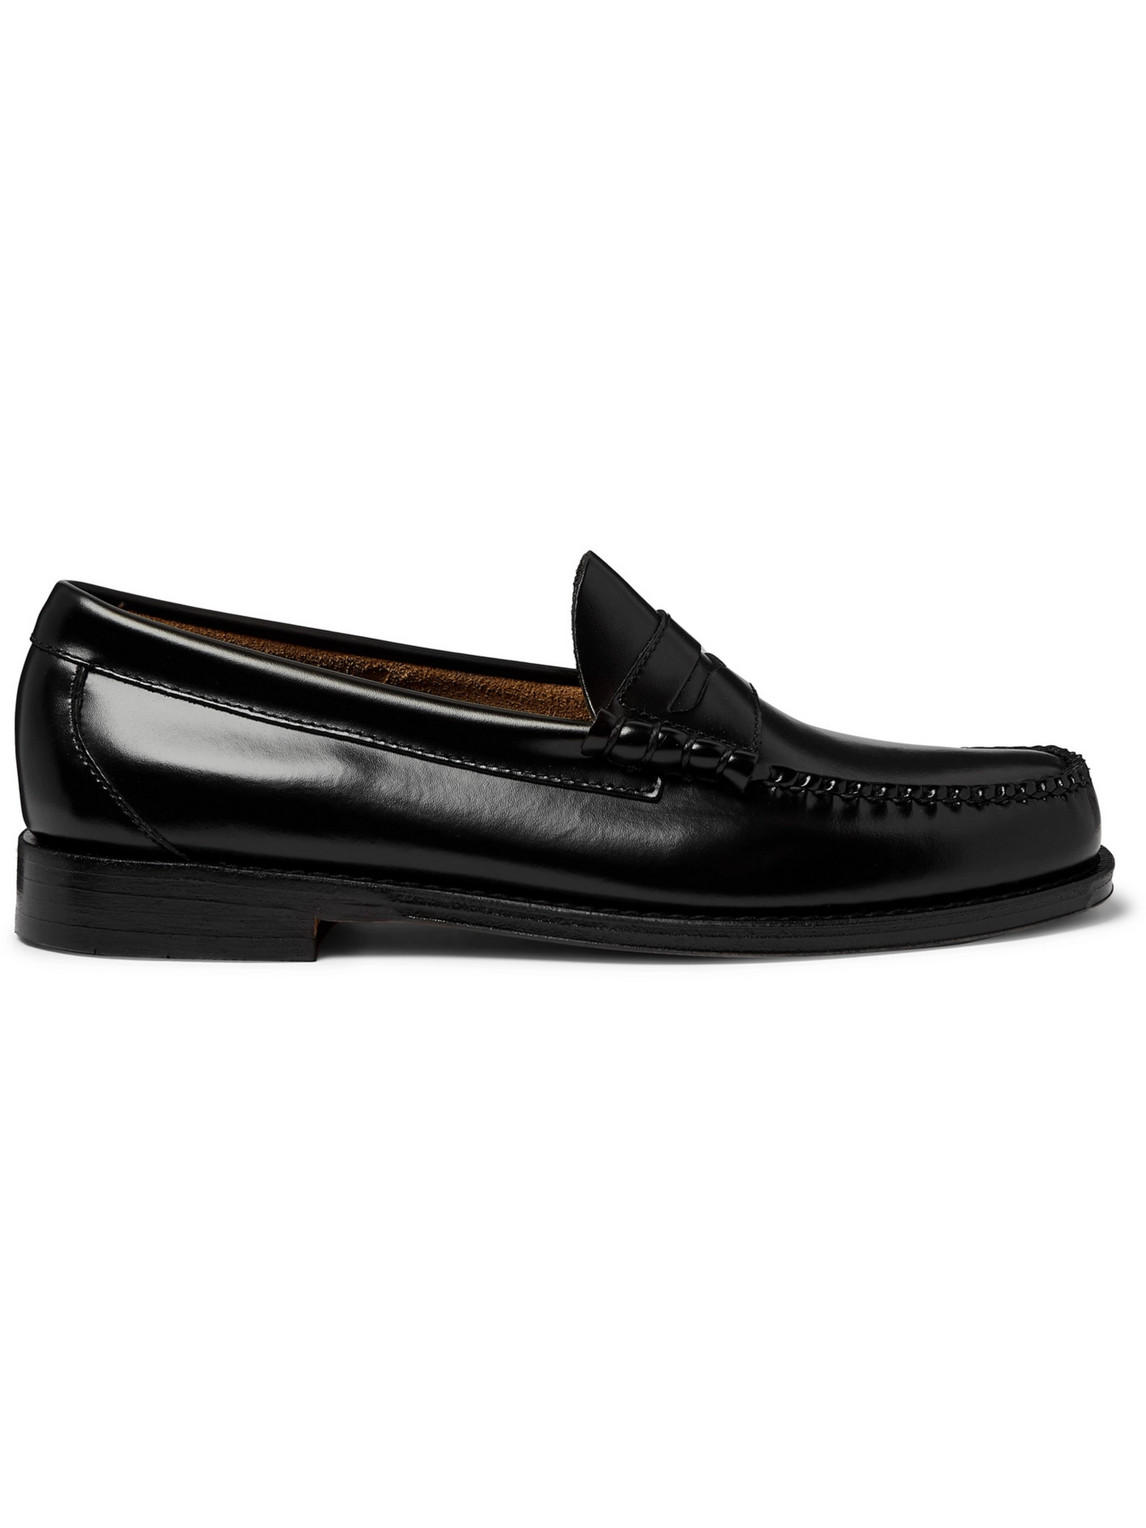 G.H. Bass & Co. - Weejuns Heritage Larson Leather Penny Loafers - Men - Black - UK 7 von G.H. Bass & Co.